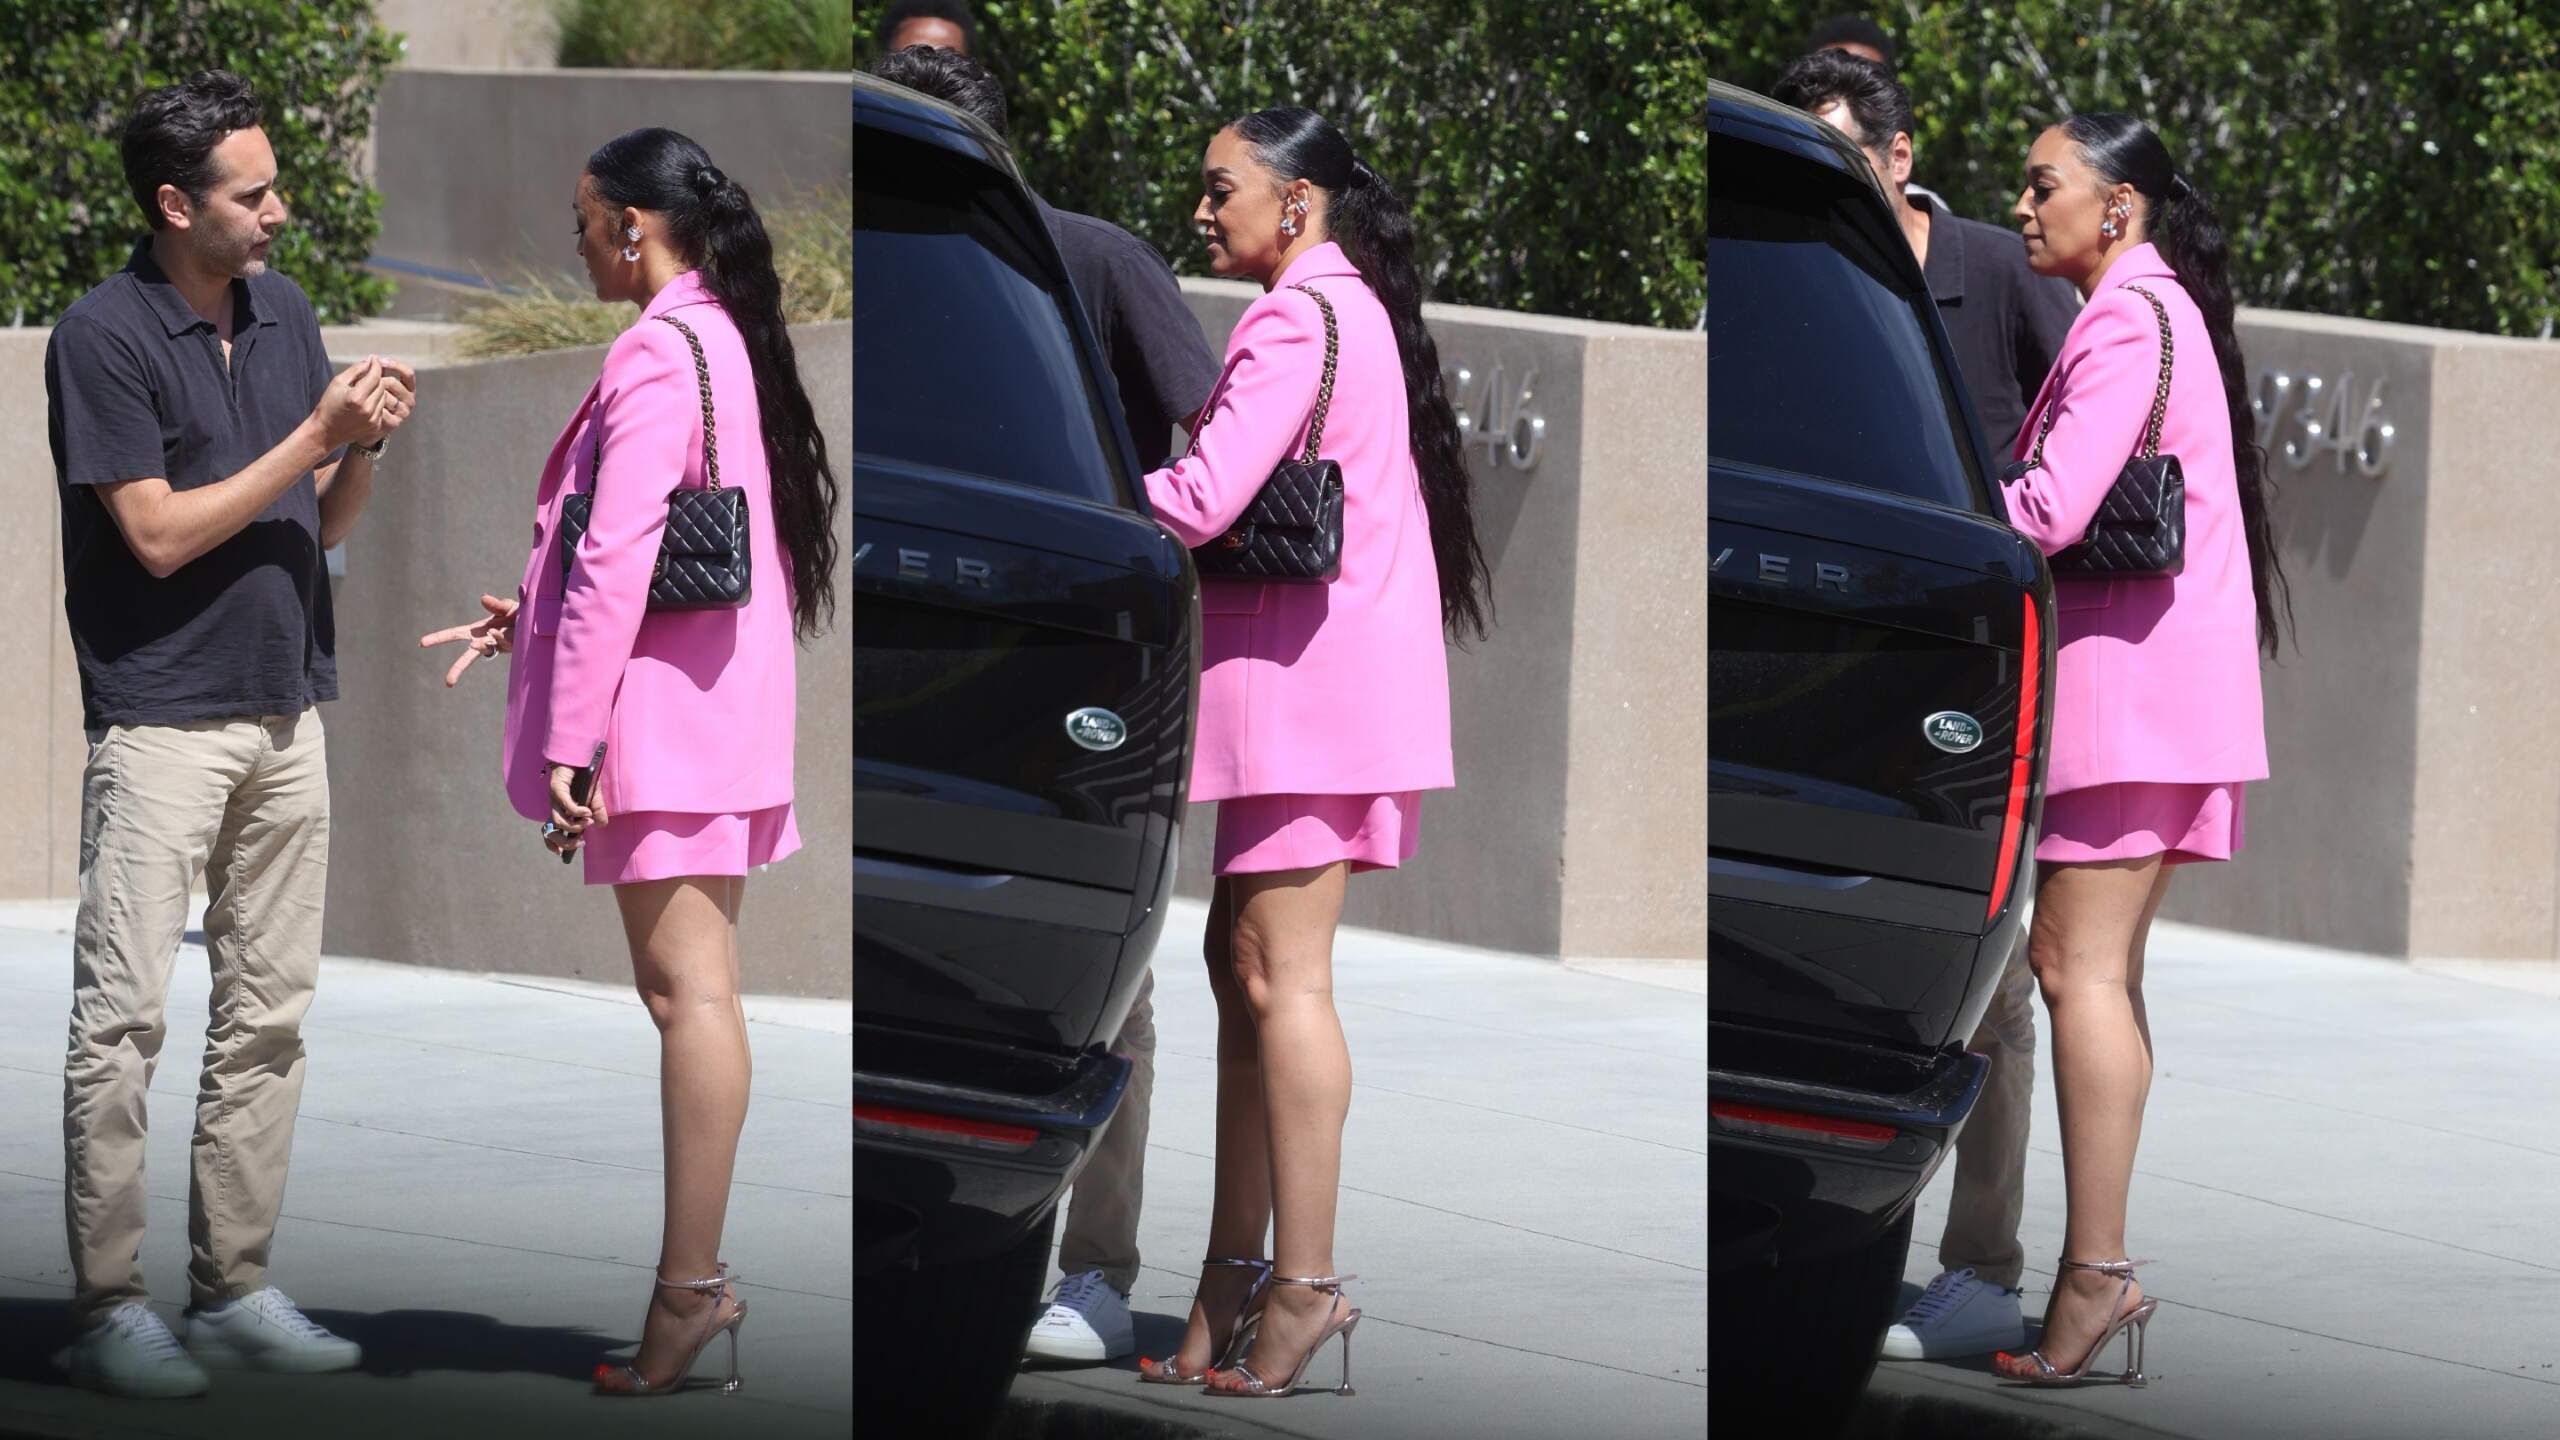 Wearing a pink blazer and matching skirt, Tia Mowry enters a black Range Rover